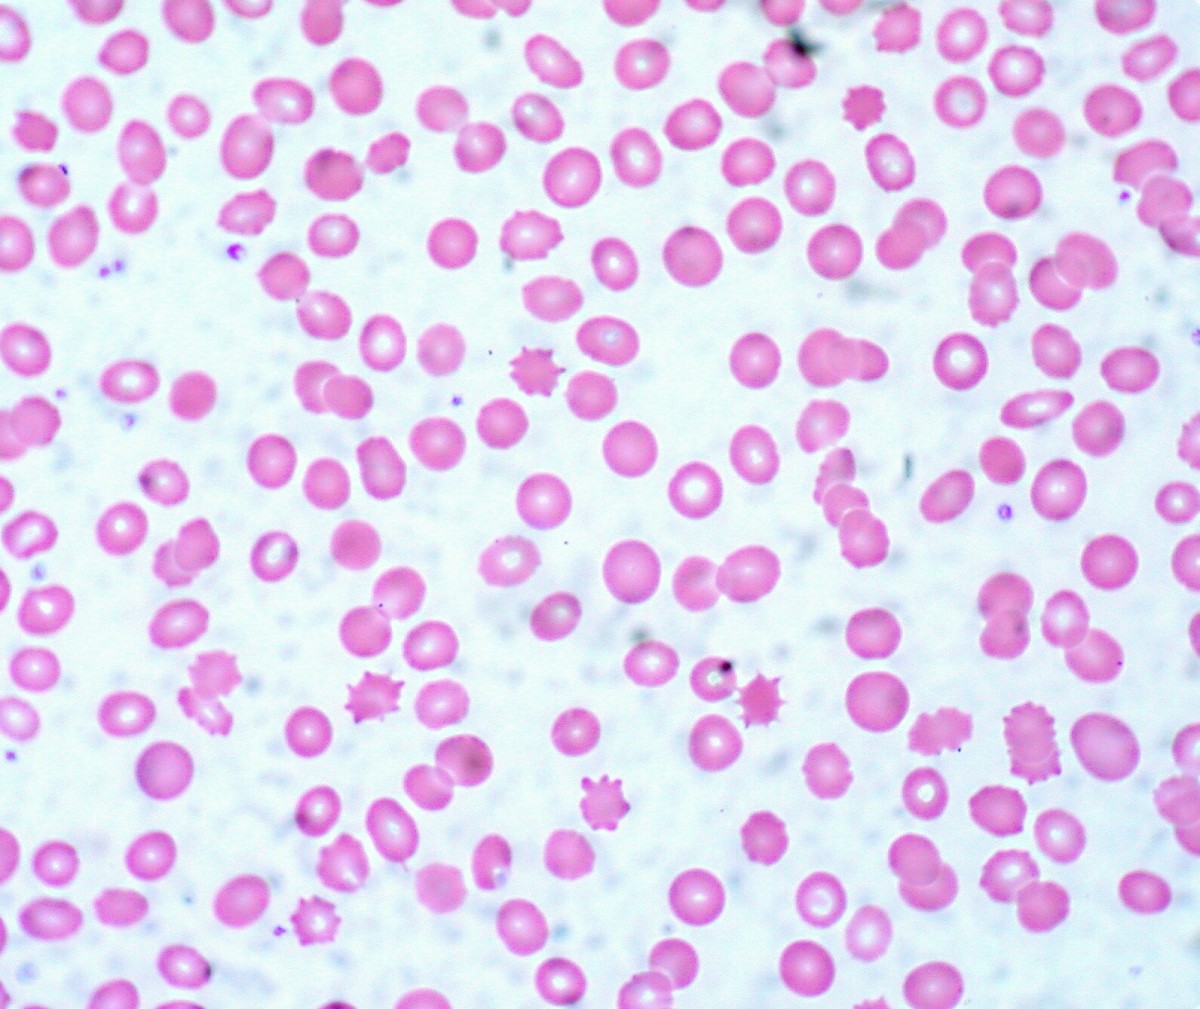 Normal and abnormal red blood cells as seen under a microscope; the spiky ones are present in certain diseases and are called acanthocytes